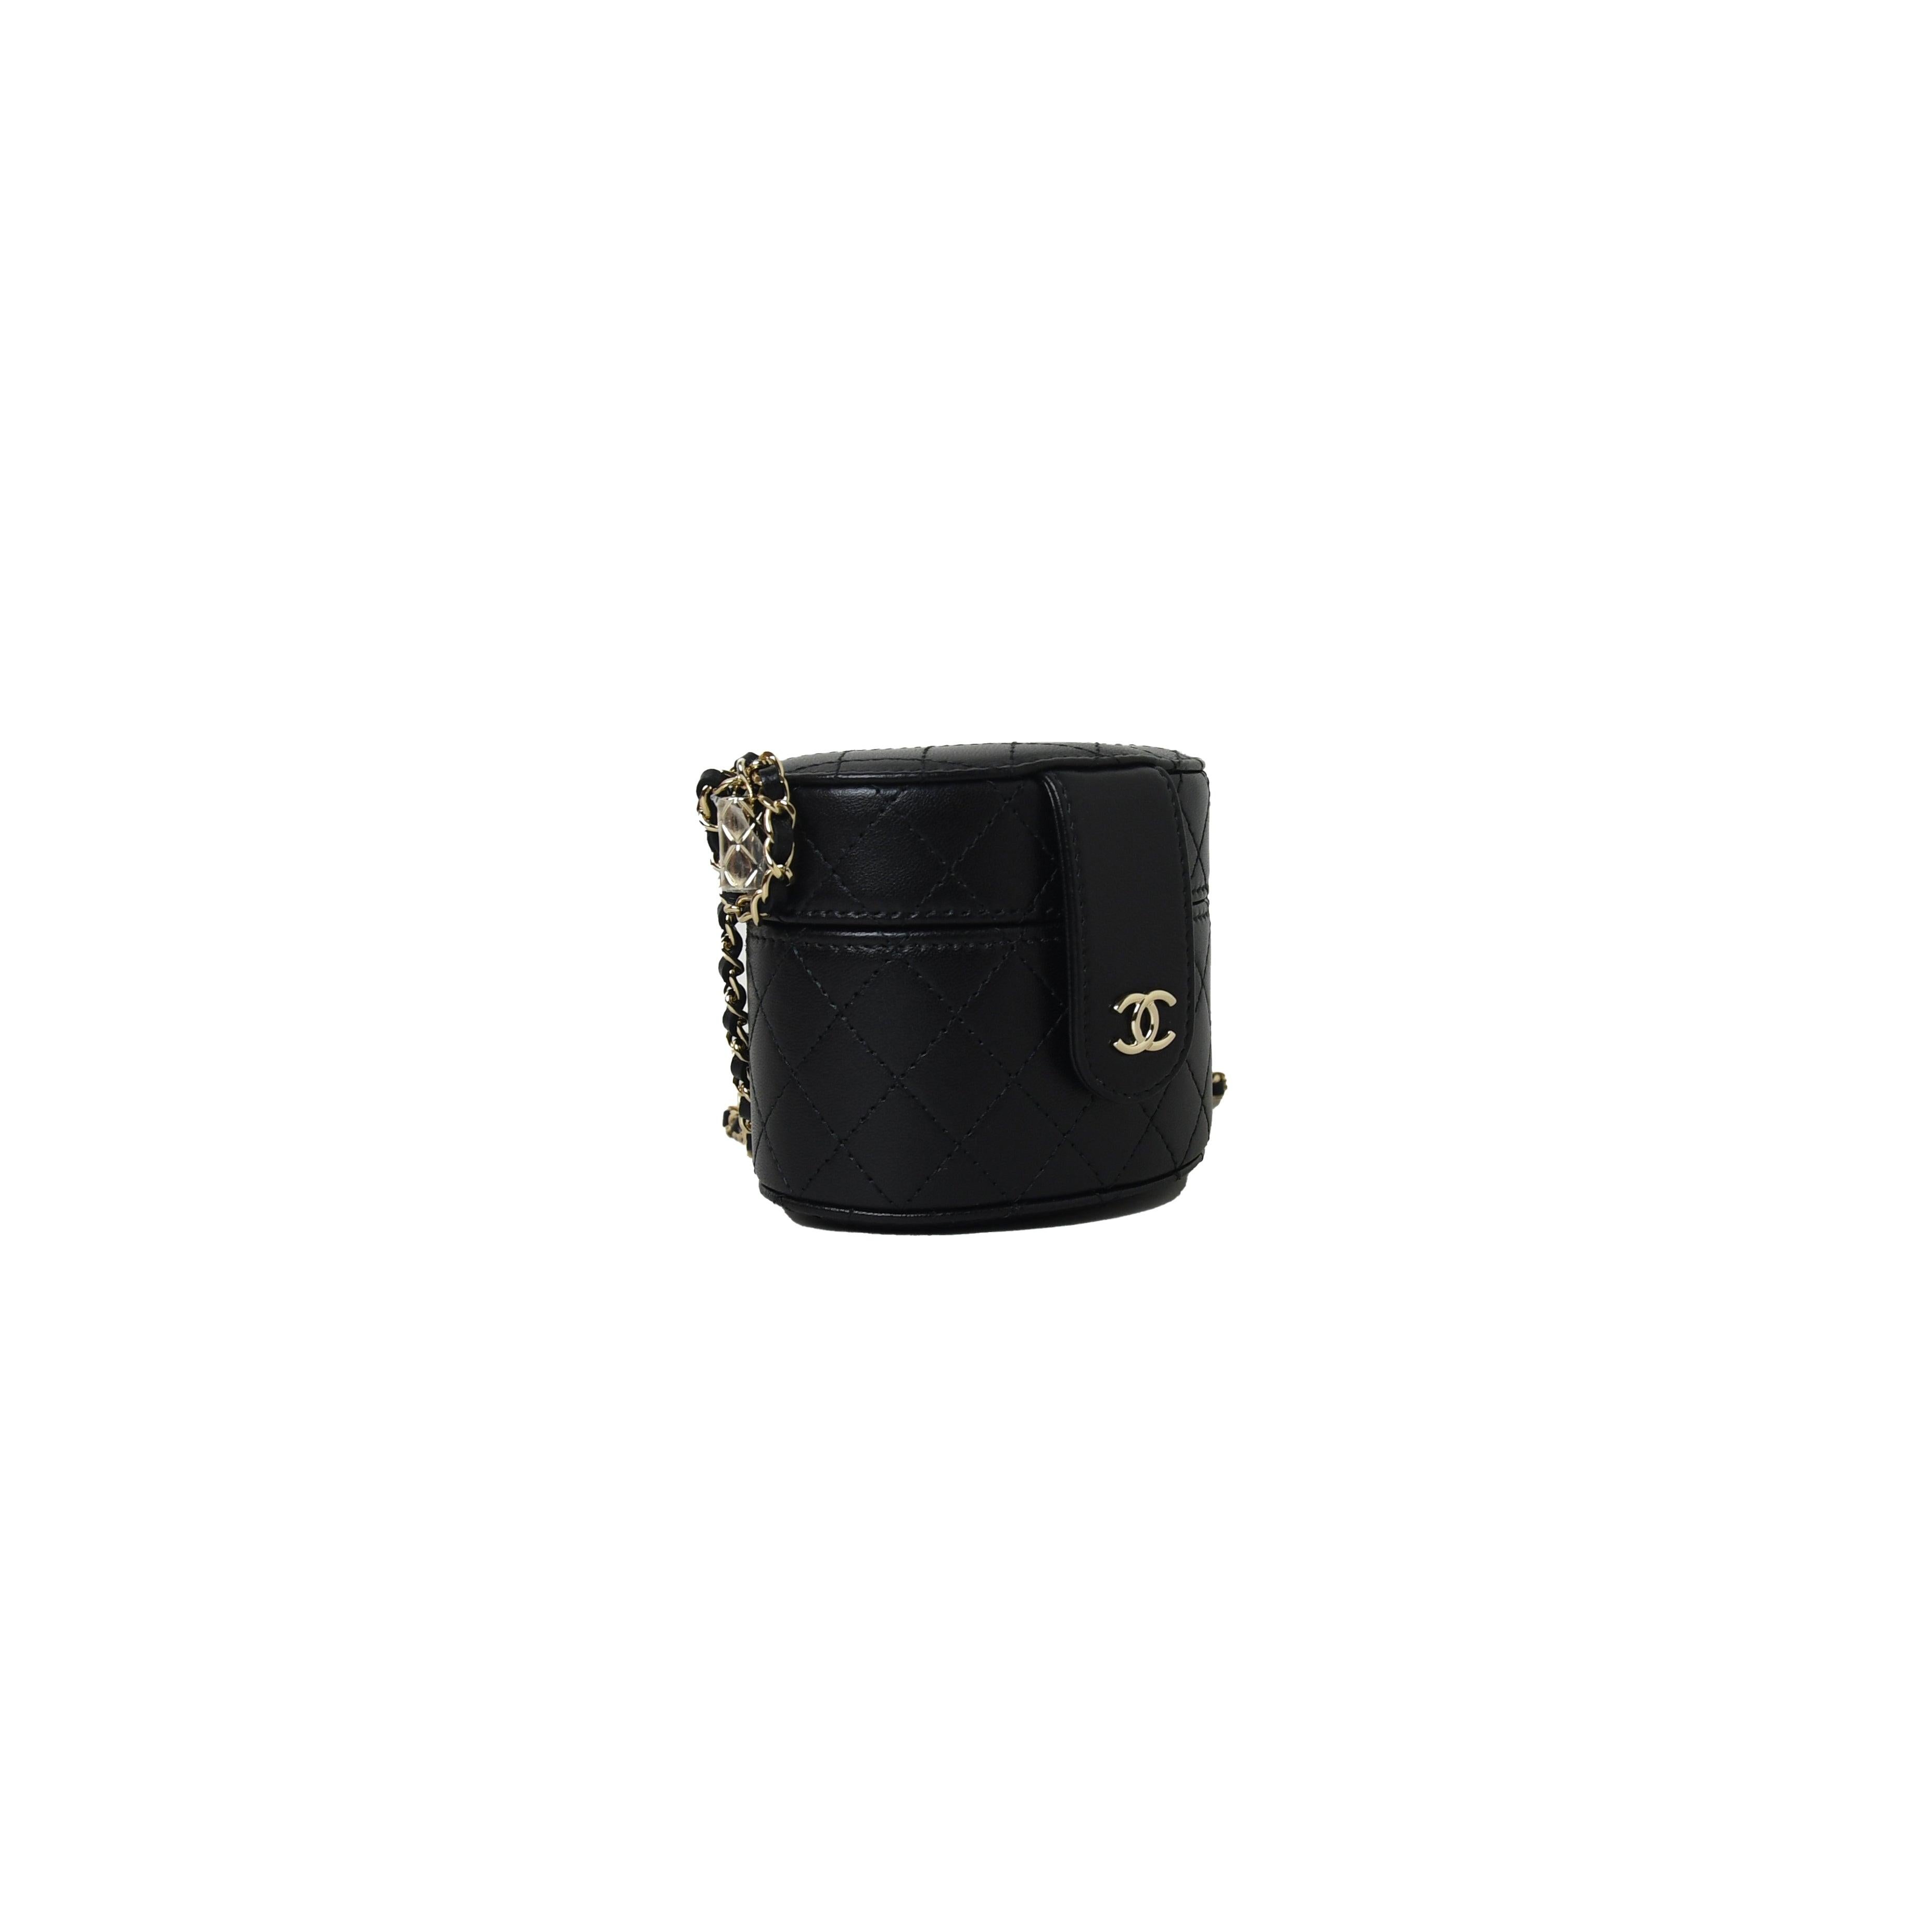 Chanel Small Vanity With Chain Black

Certified Authentic

Condition: Brand New

Dimension: 3.5 × 5.5 × 3 in

Accompanied by: This item comes with all accessories